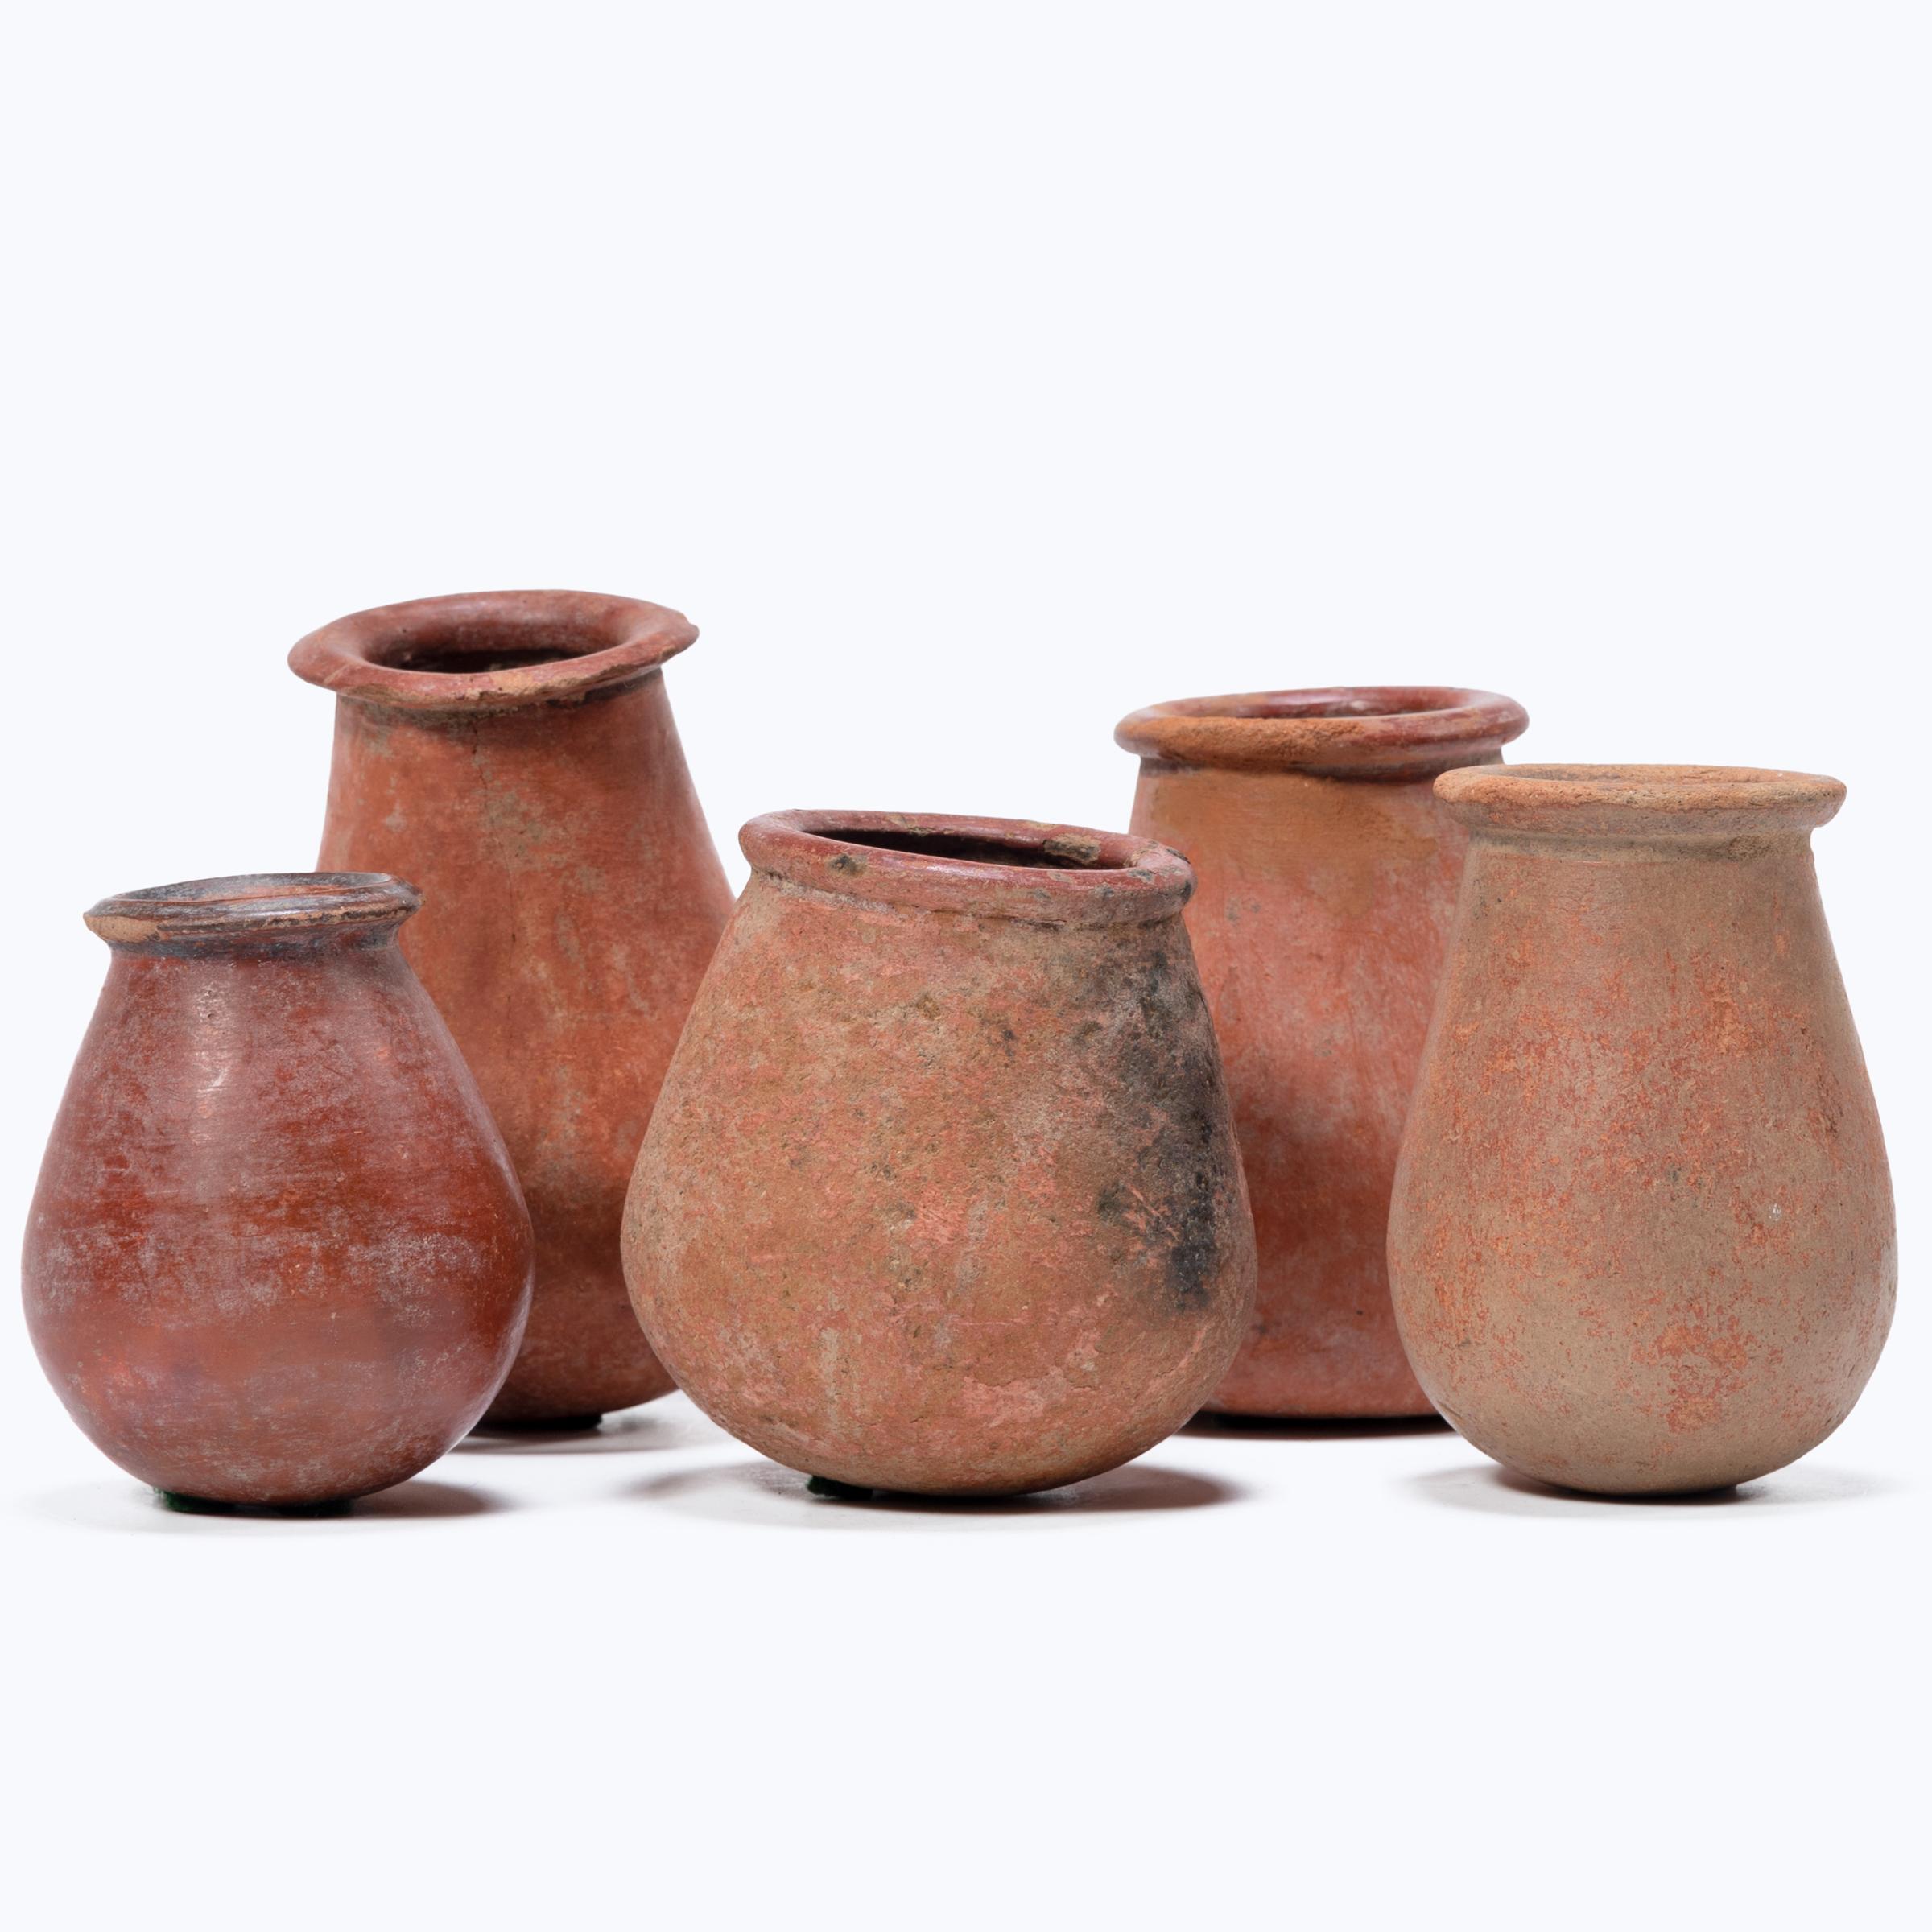 A grouping of five small African redware vessels